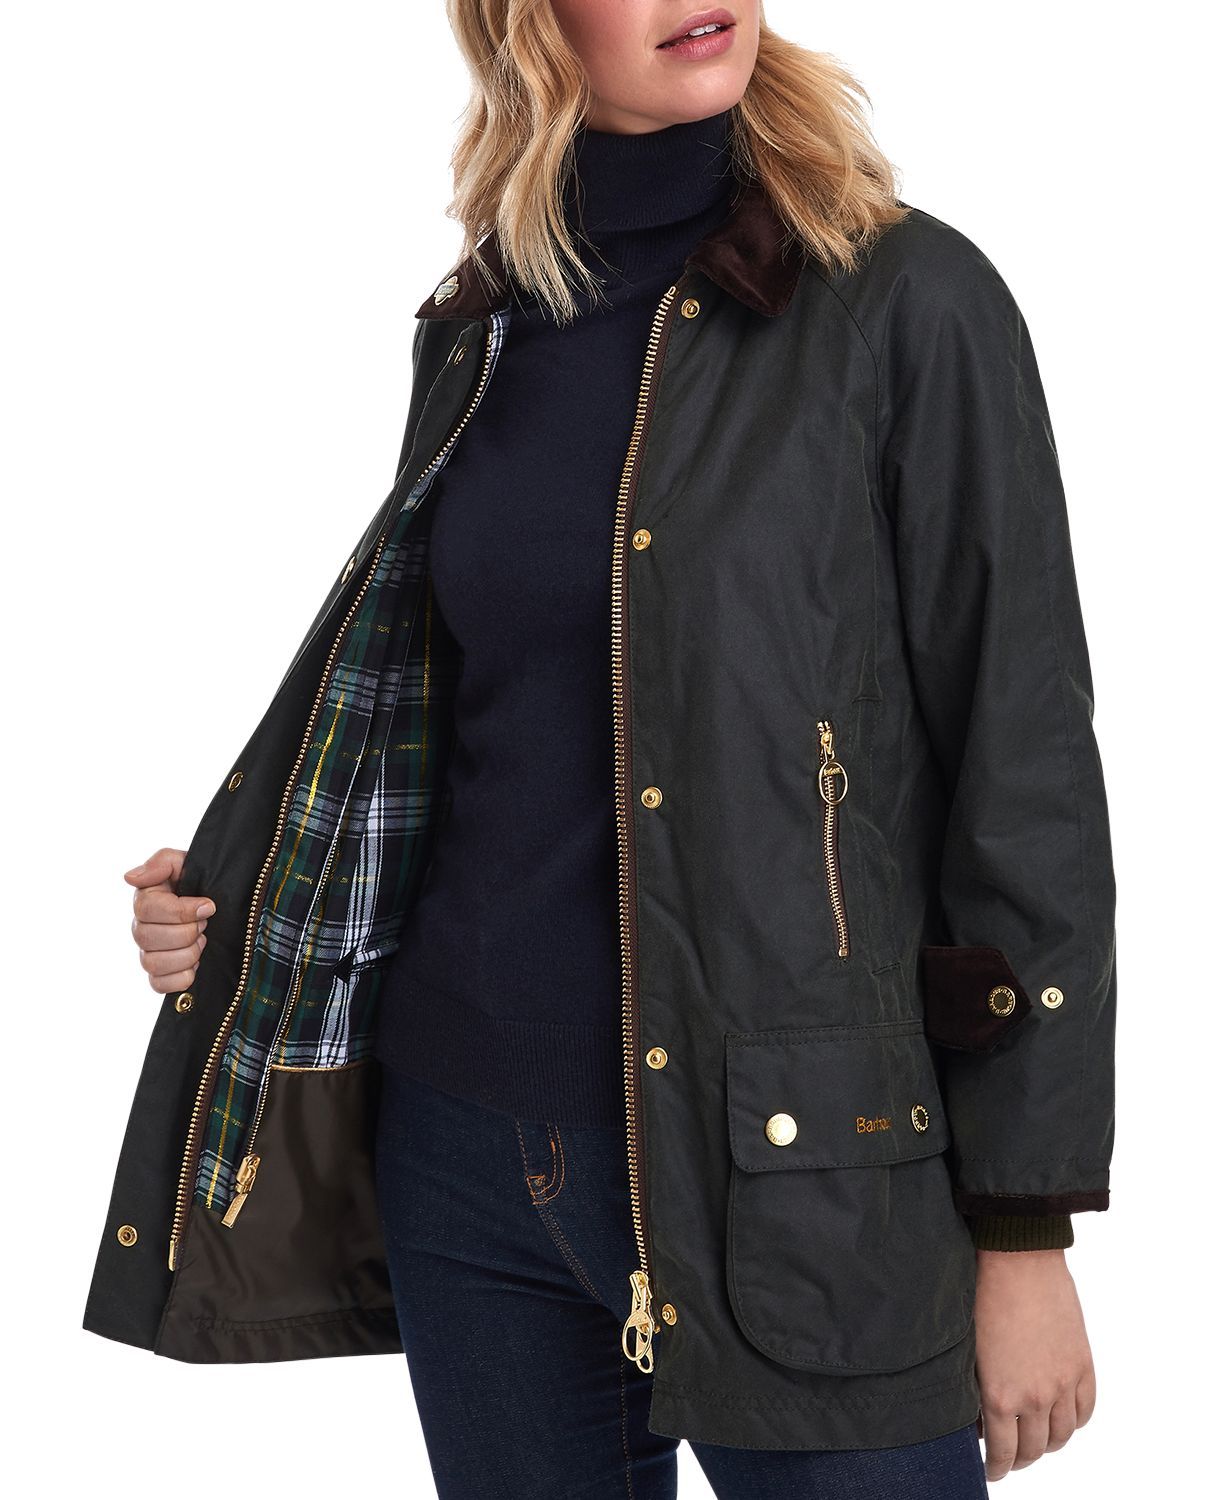 Barbour Launches Icons Re-Engineered Collection to Celebrate 125th